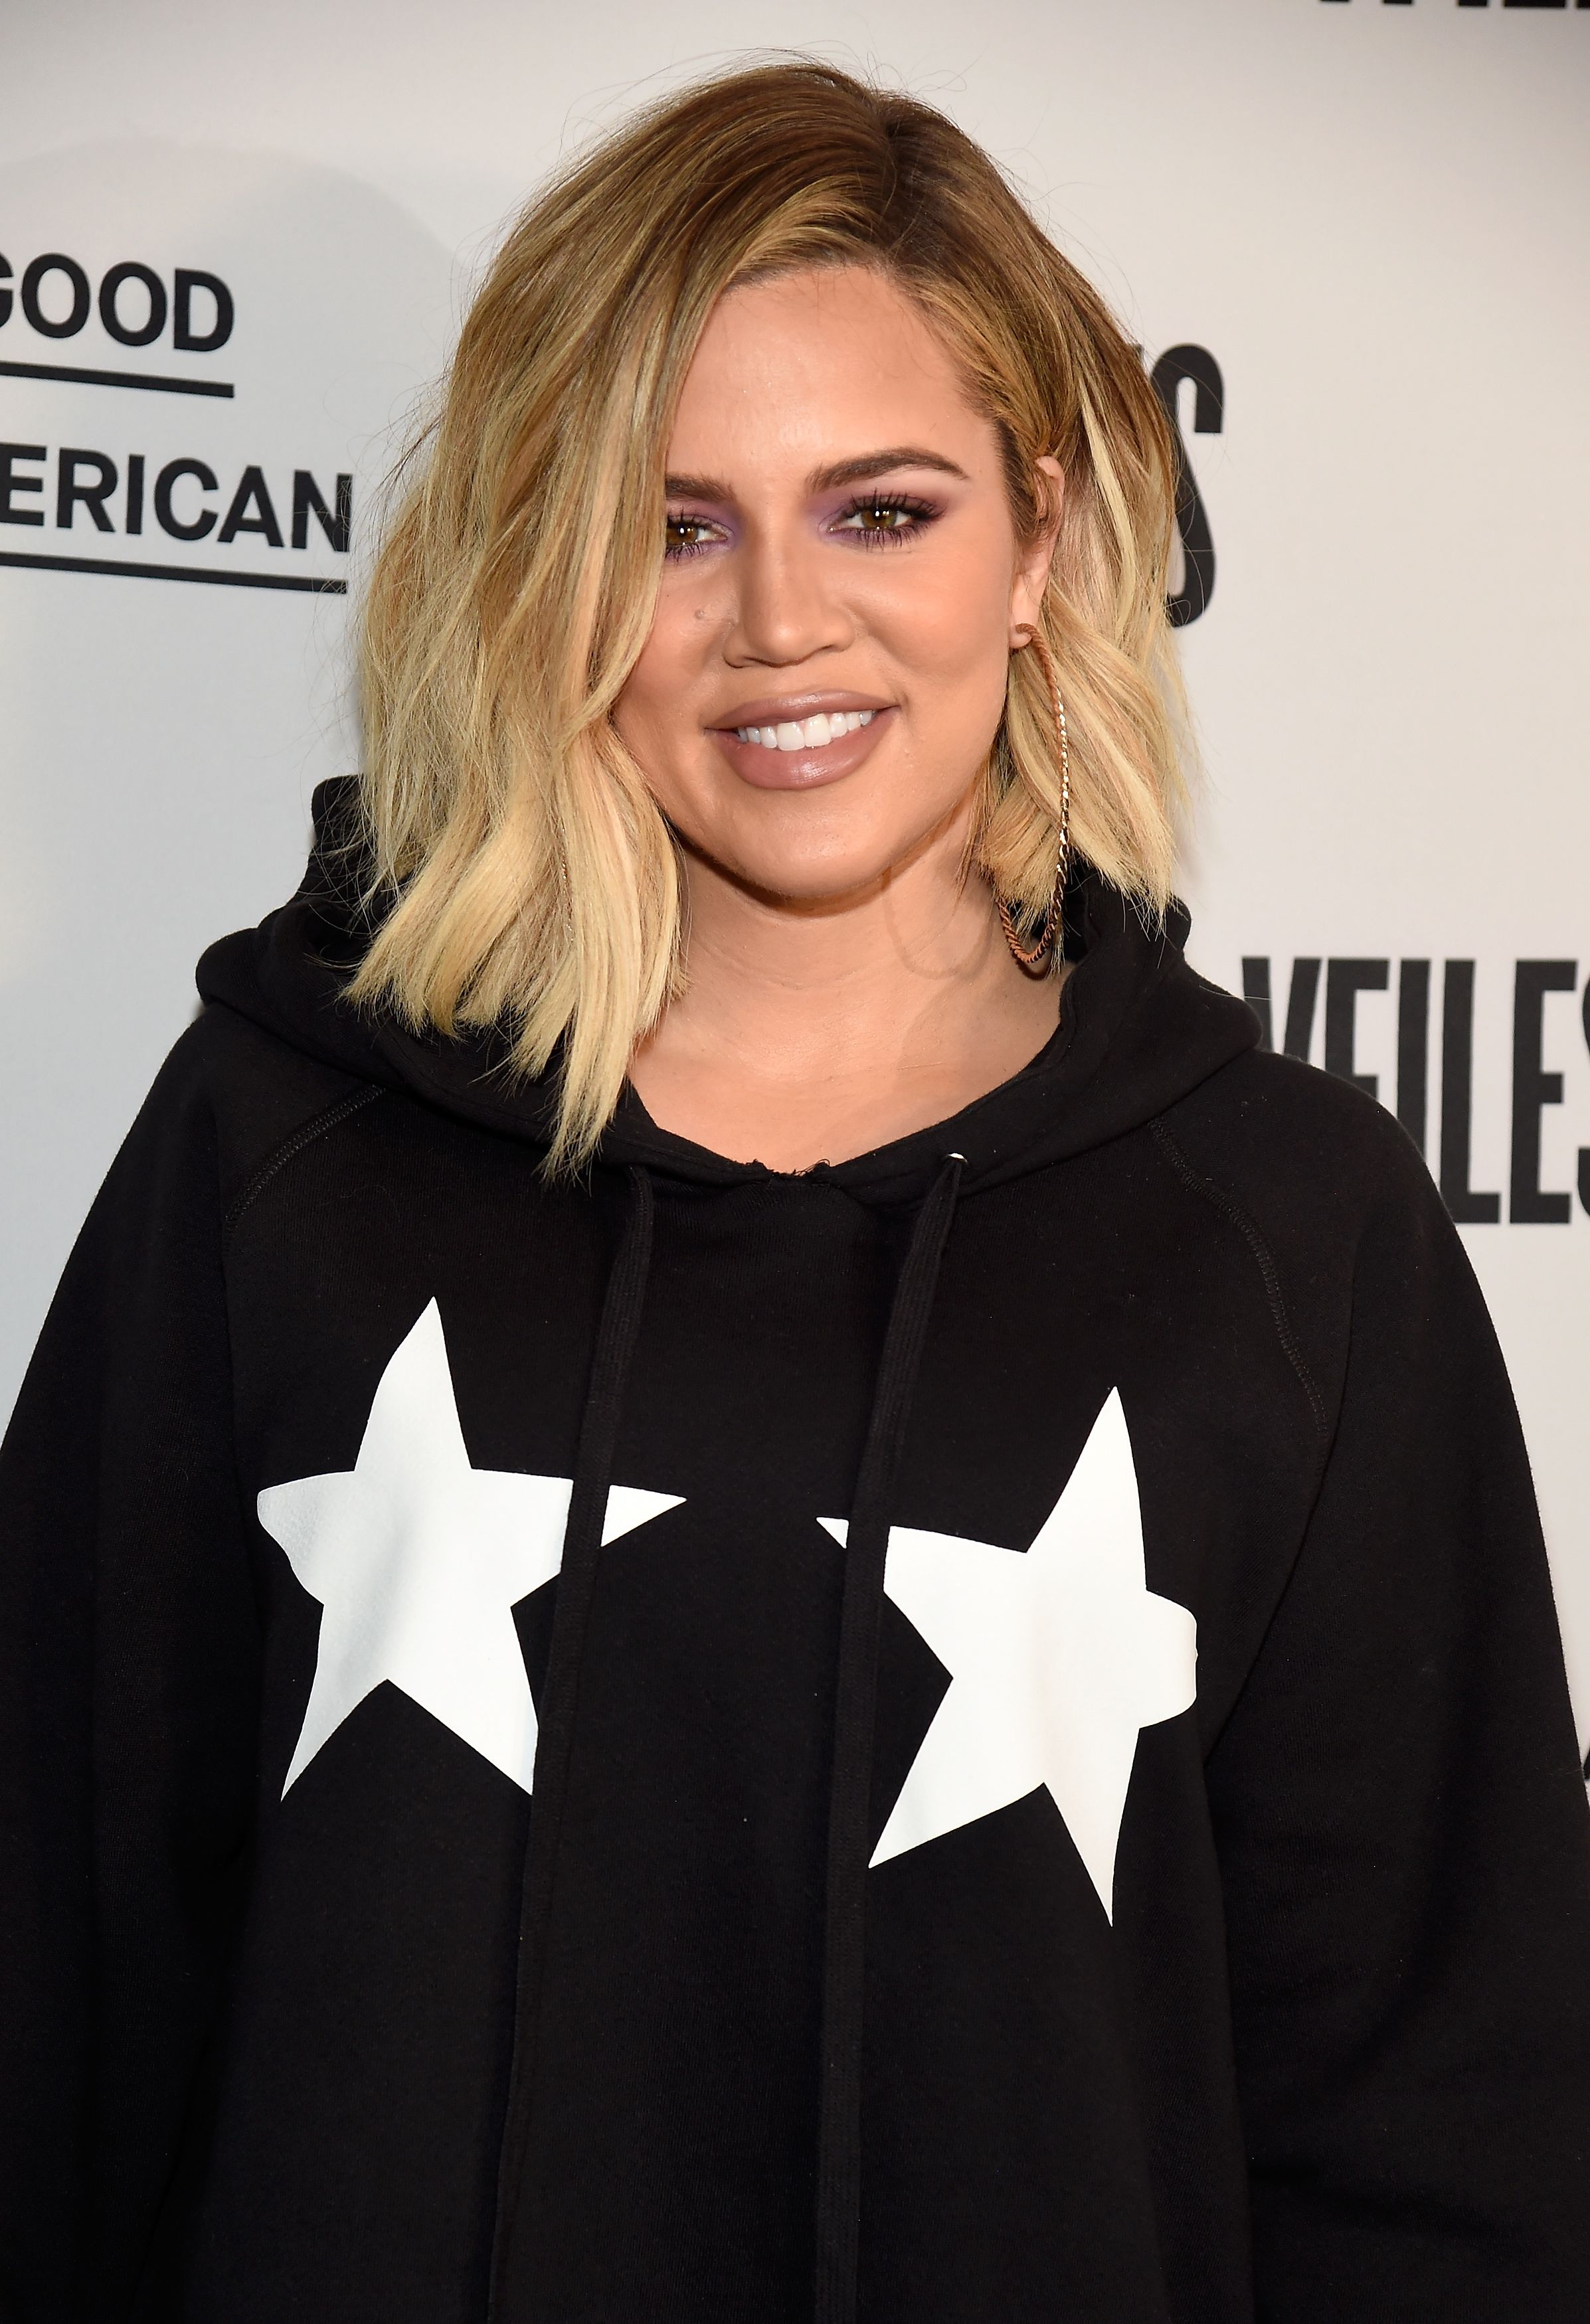 Khloe Kardashian at the Khloe Kardashian & Emma Grede Celebrate Good American Pop-Up in Collaboration with VFILES on October 26, 2017 | Photo: Getty Images